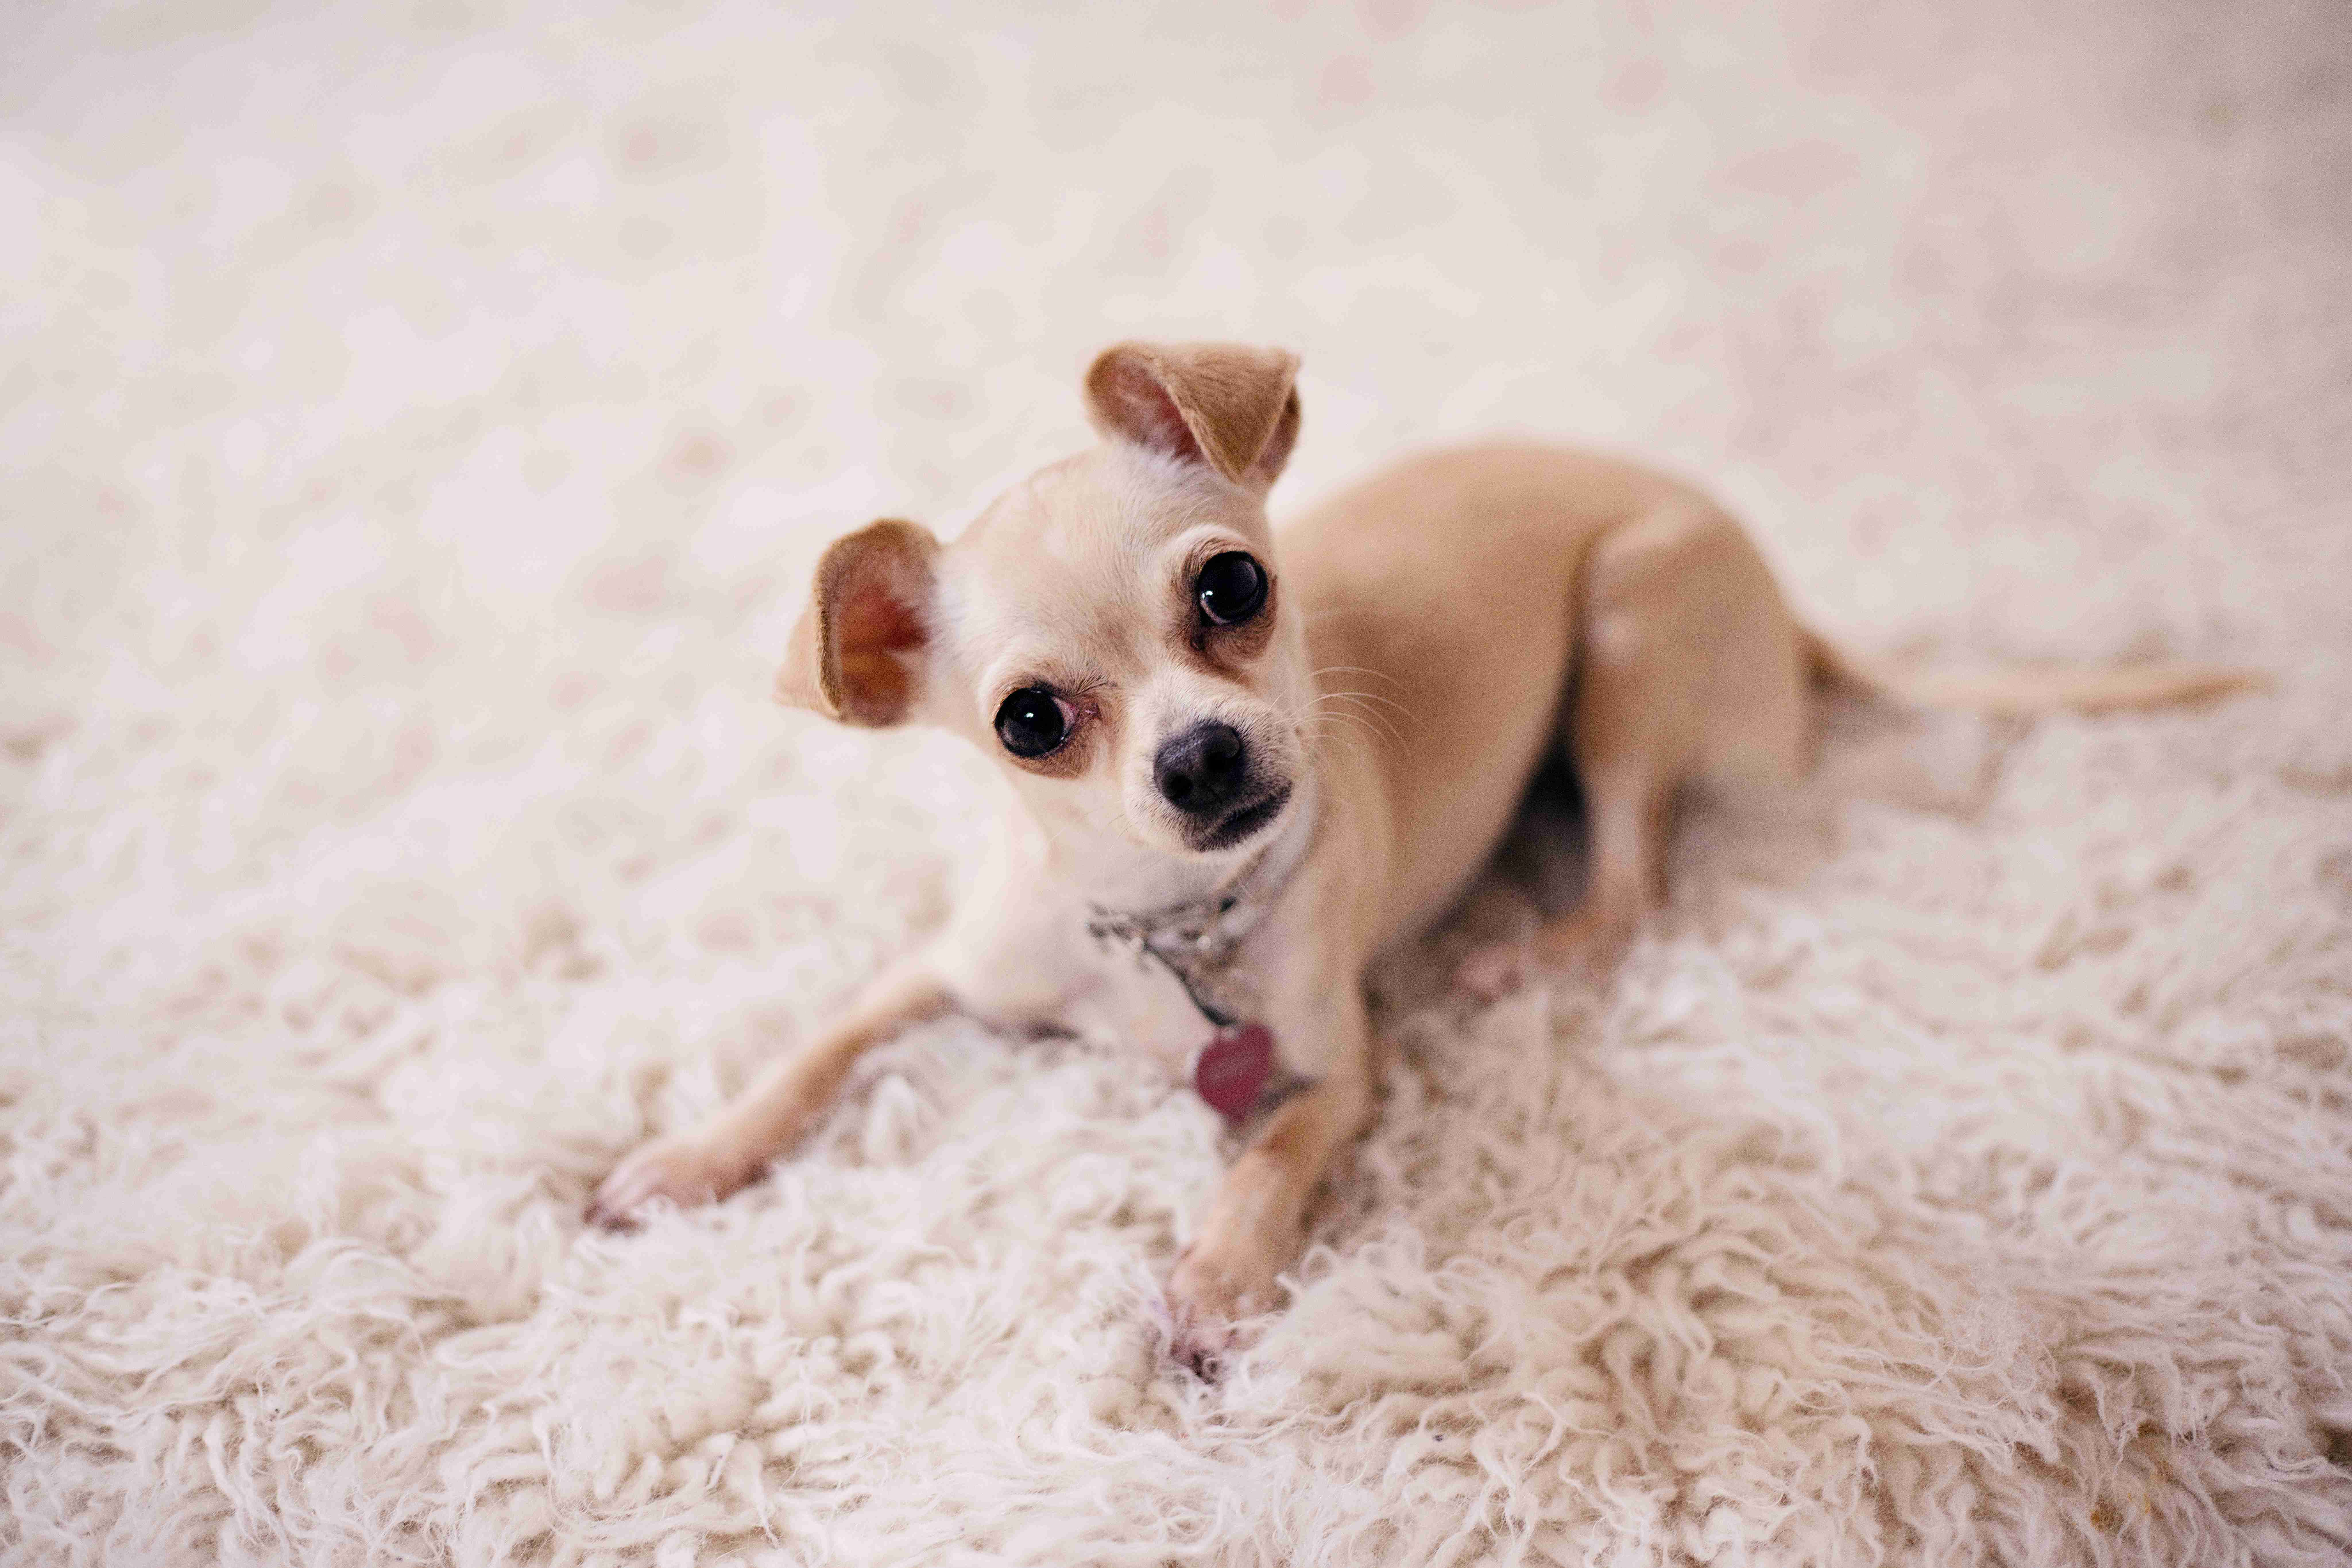 How can you safely introduce a Chihuahua with anger issues to new people or animals?